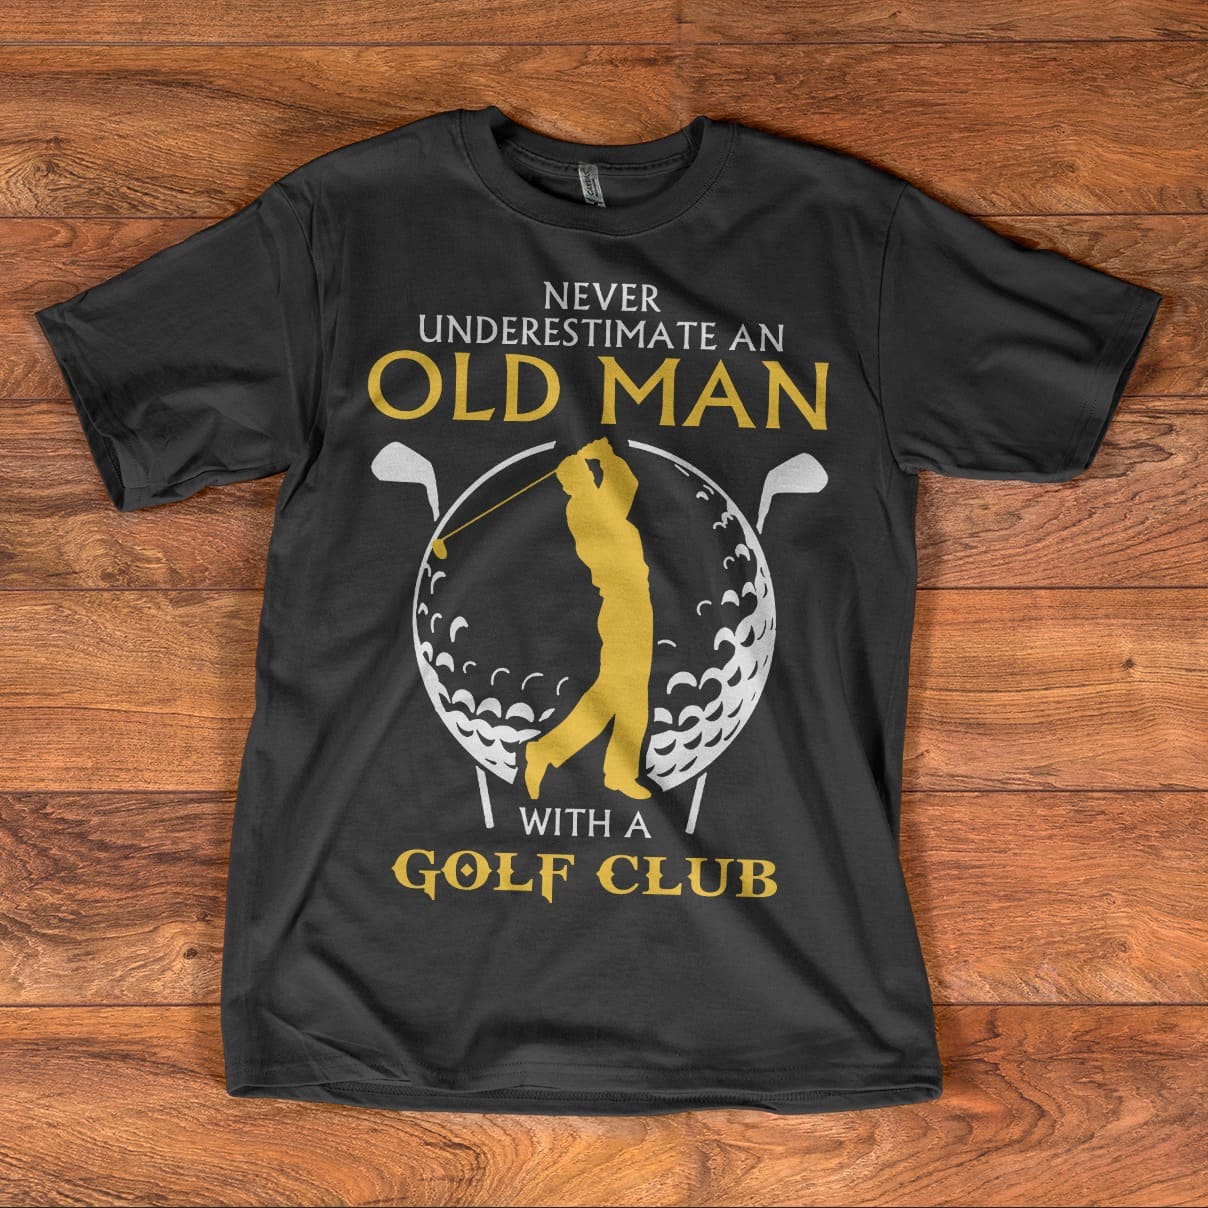 Golf Player - Never underestimate an old man with golf club